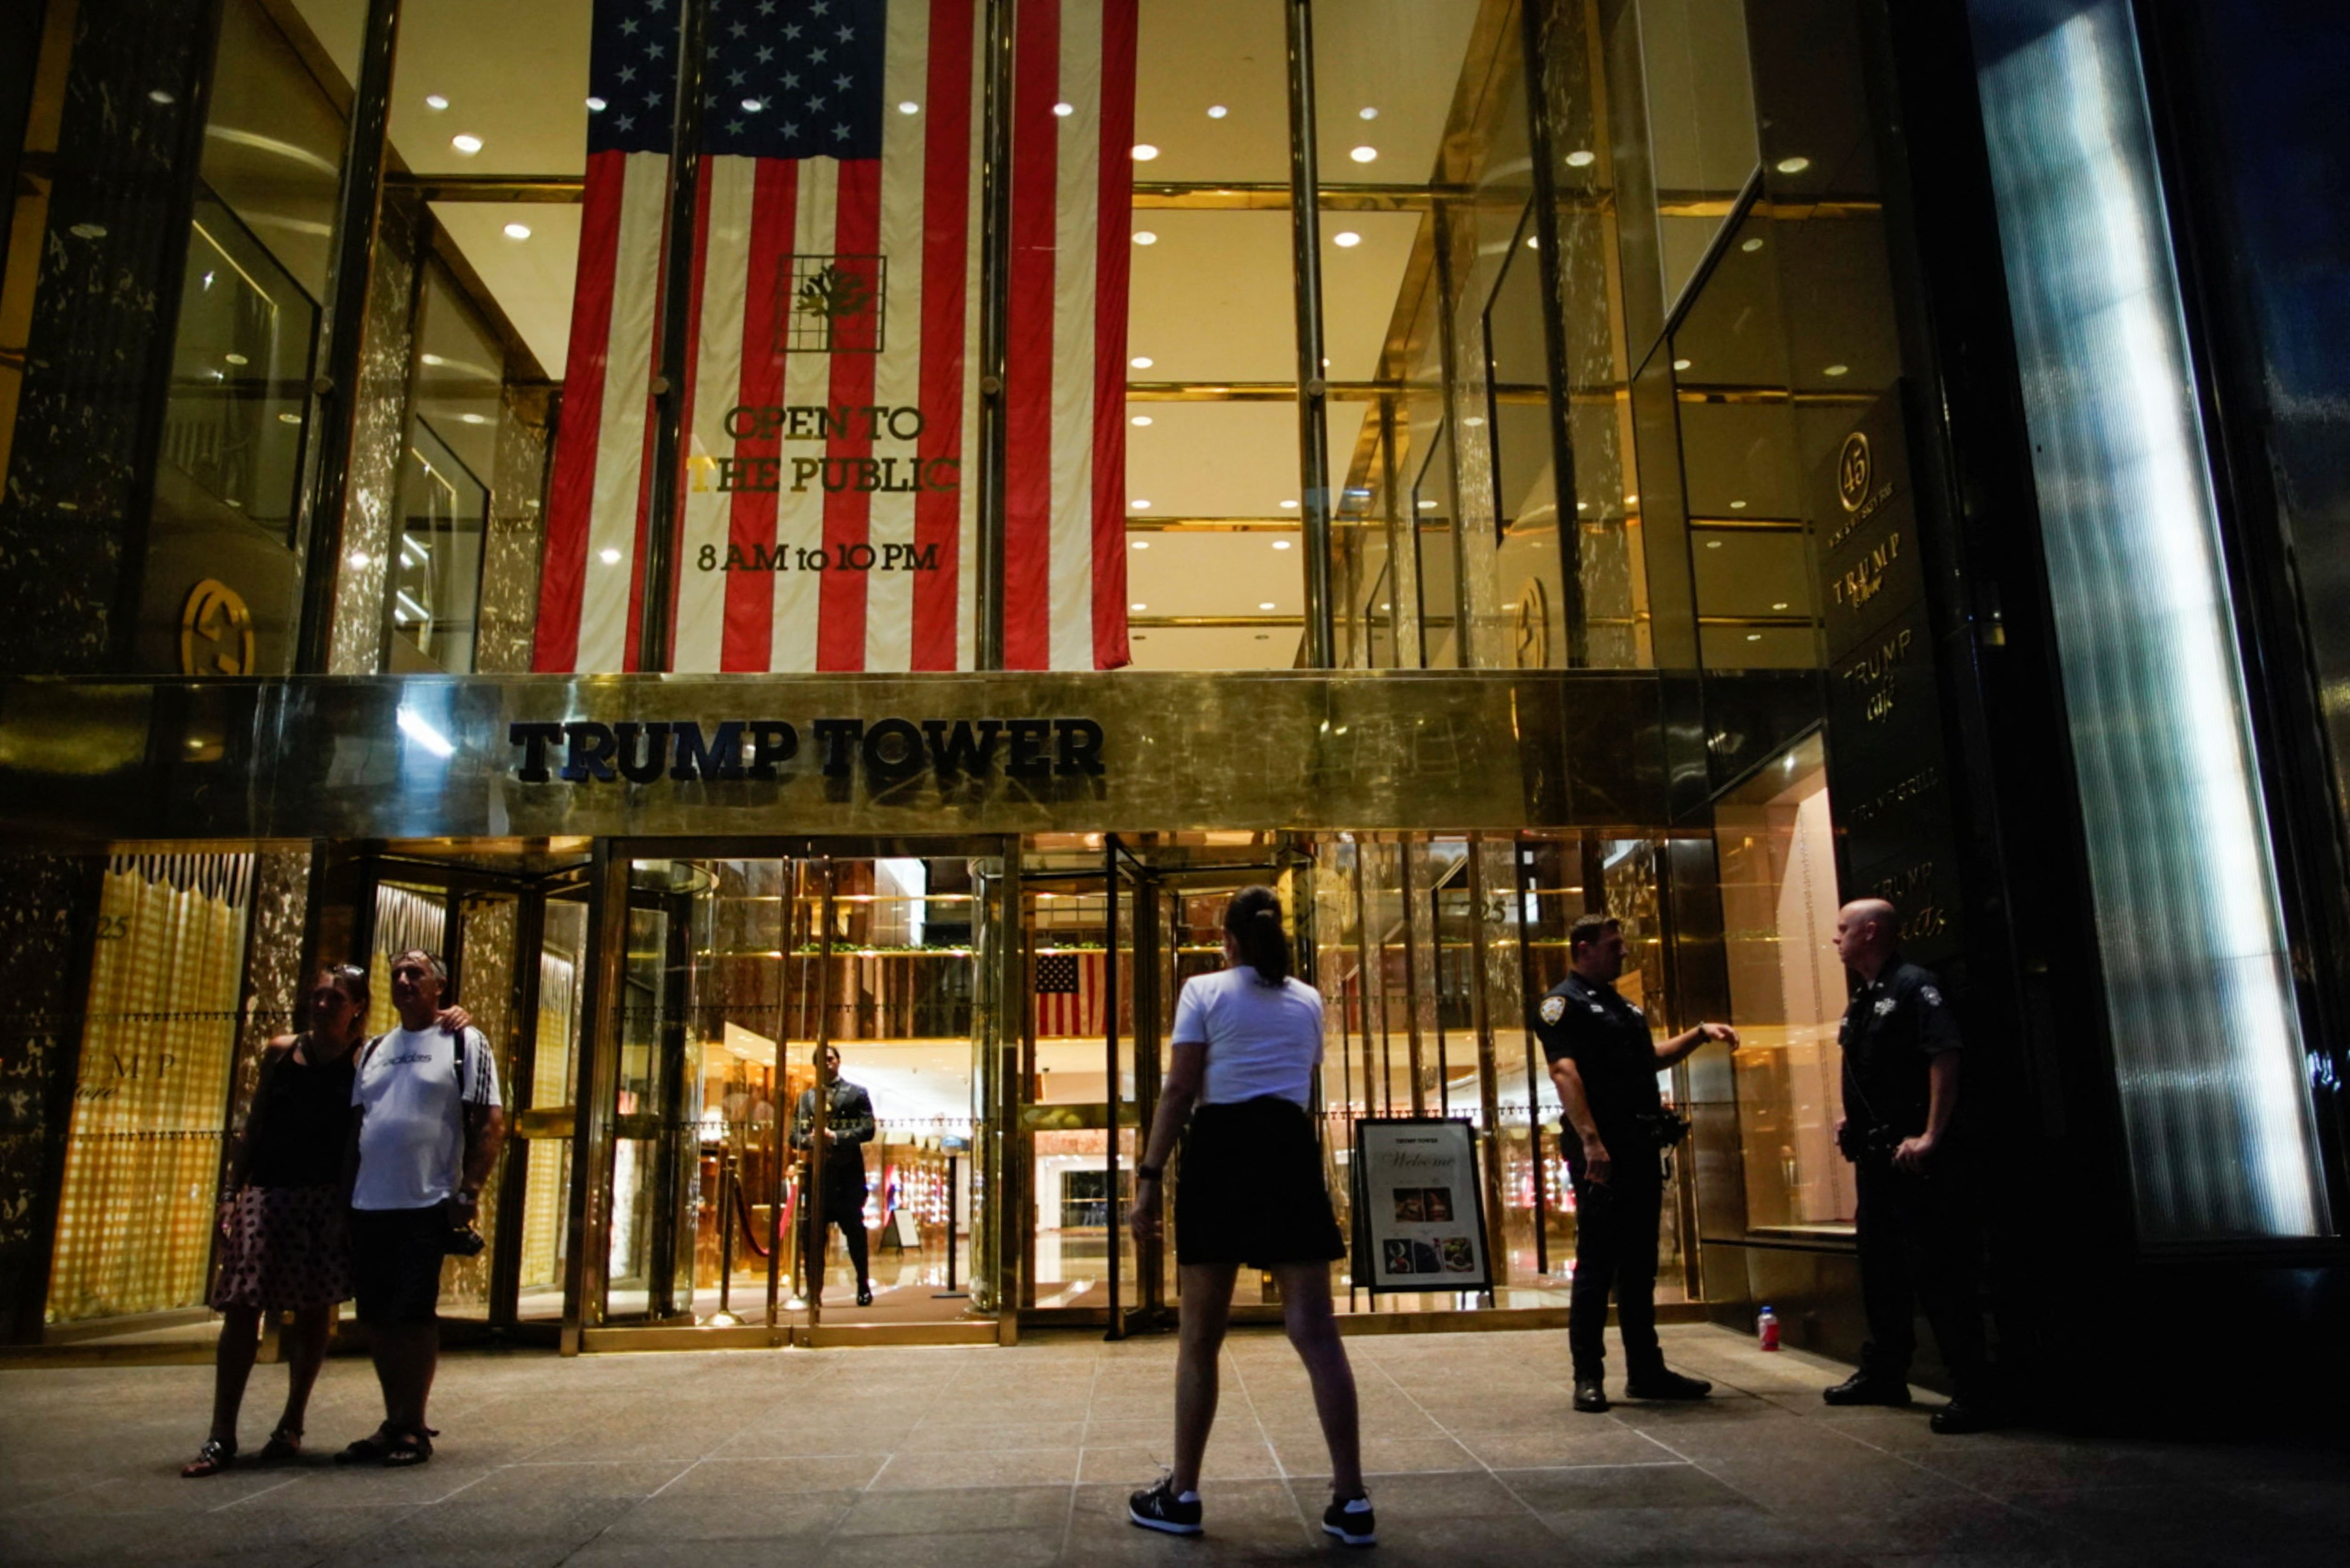 People and police officers stand outside Trump Tower after former U.S. President Donald Trump said that FBI agents raided his Mar-a-Lago Palm Beach home, in New York City, U.S., August 8, 2022. REUTERS/Eduardo Munoz